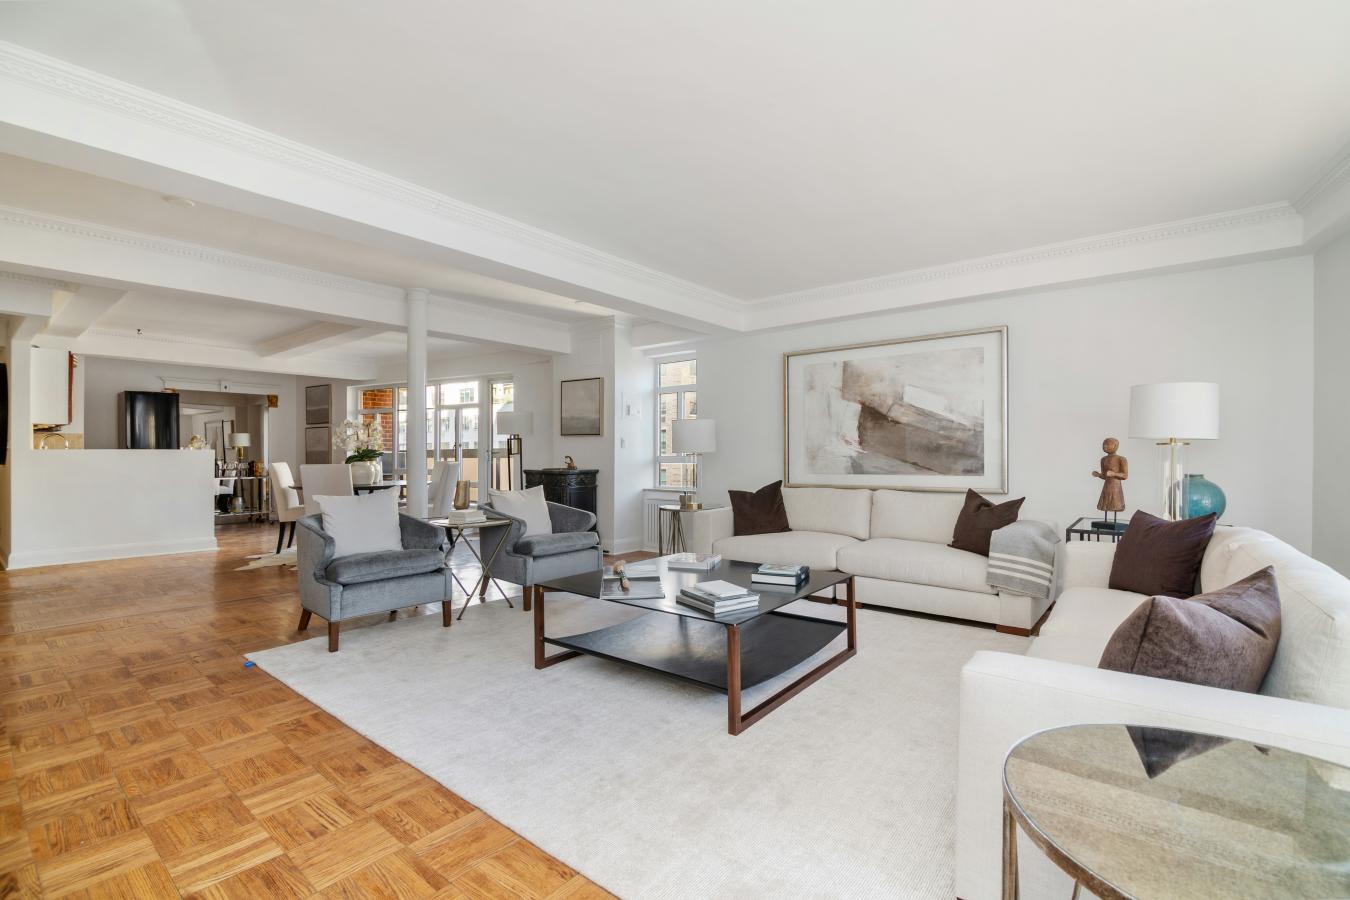 750 Park Avenue, New York, New York, 10021, United States, 2 Bedrooms Bedrooms, ,2 BathroomsBathrooms,Residential,For Sale,750 Park Avenue,1484571